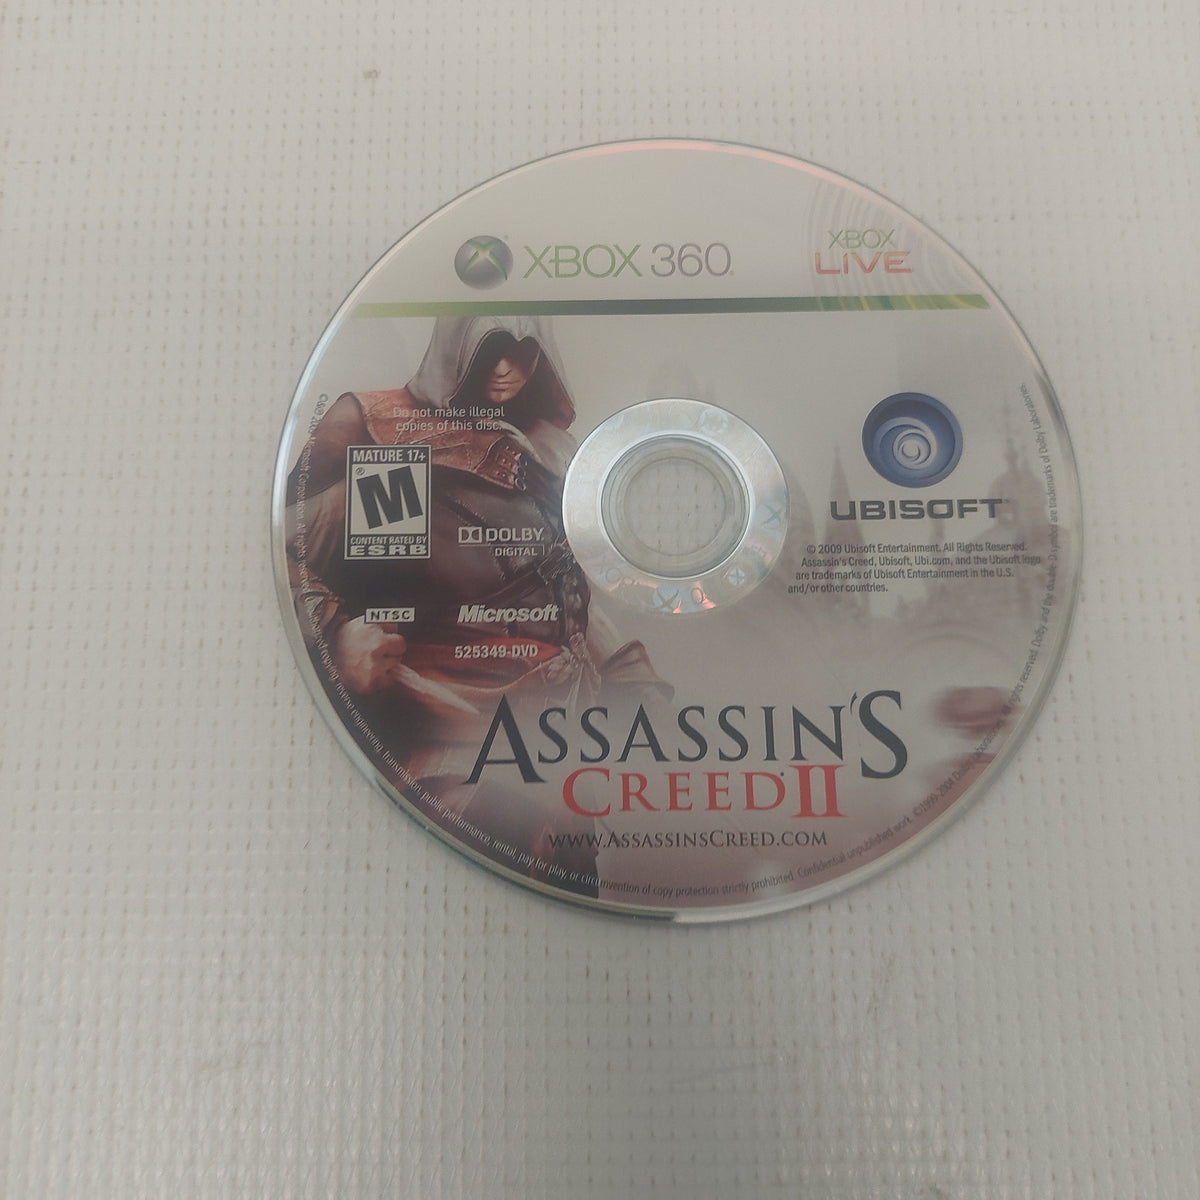 Assassin's Creed (Microsoft Xbox 360, 2007) for sale online